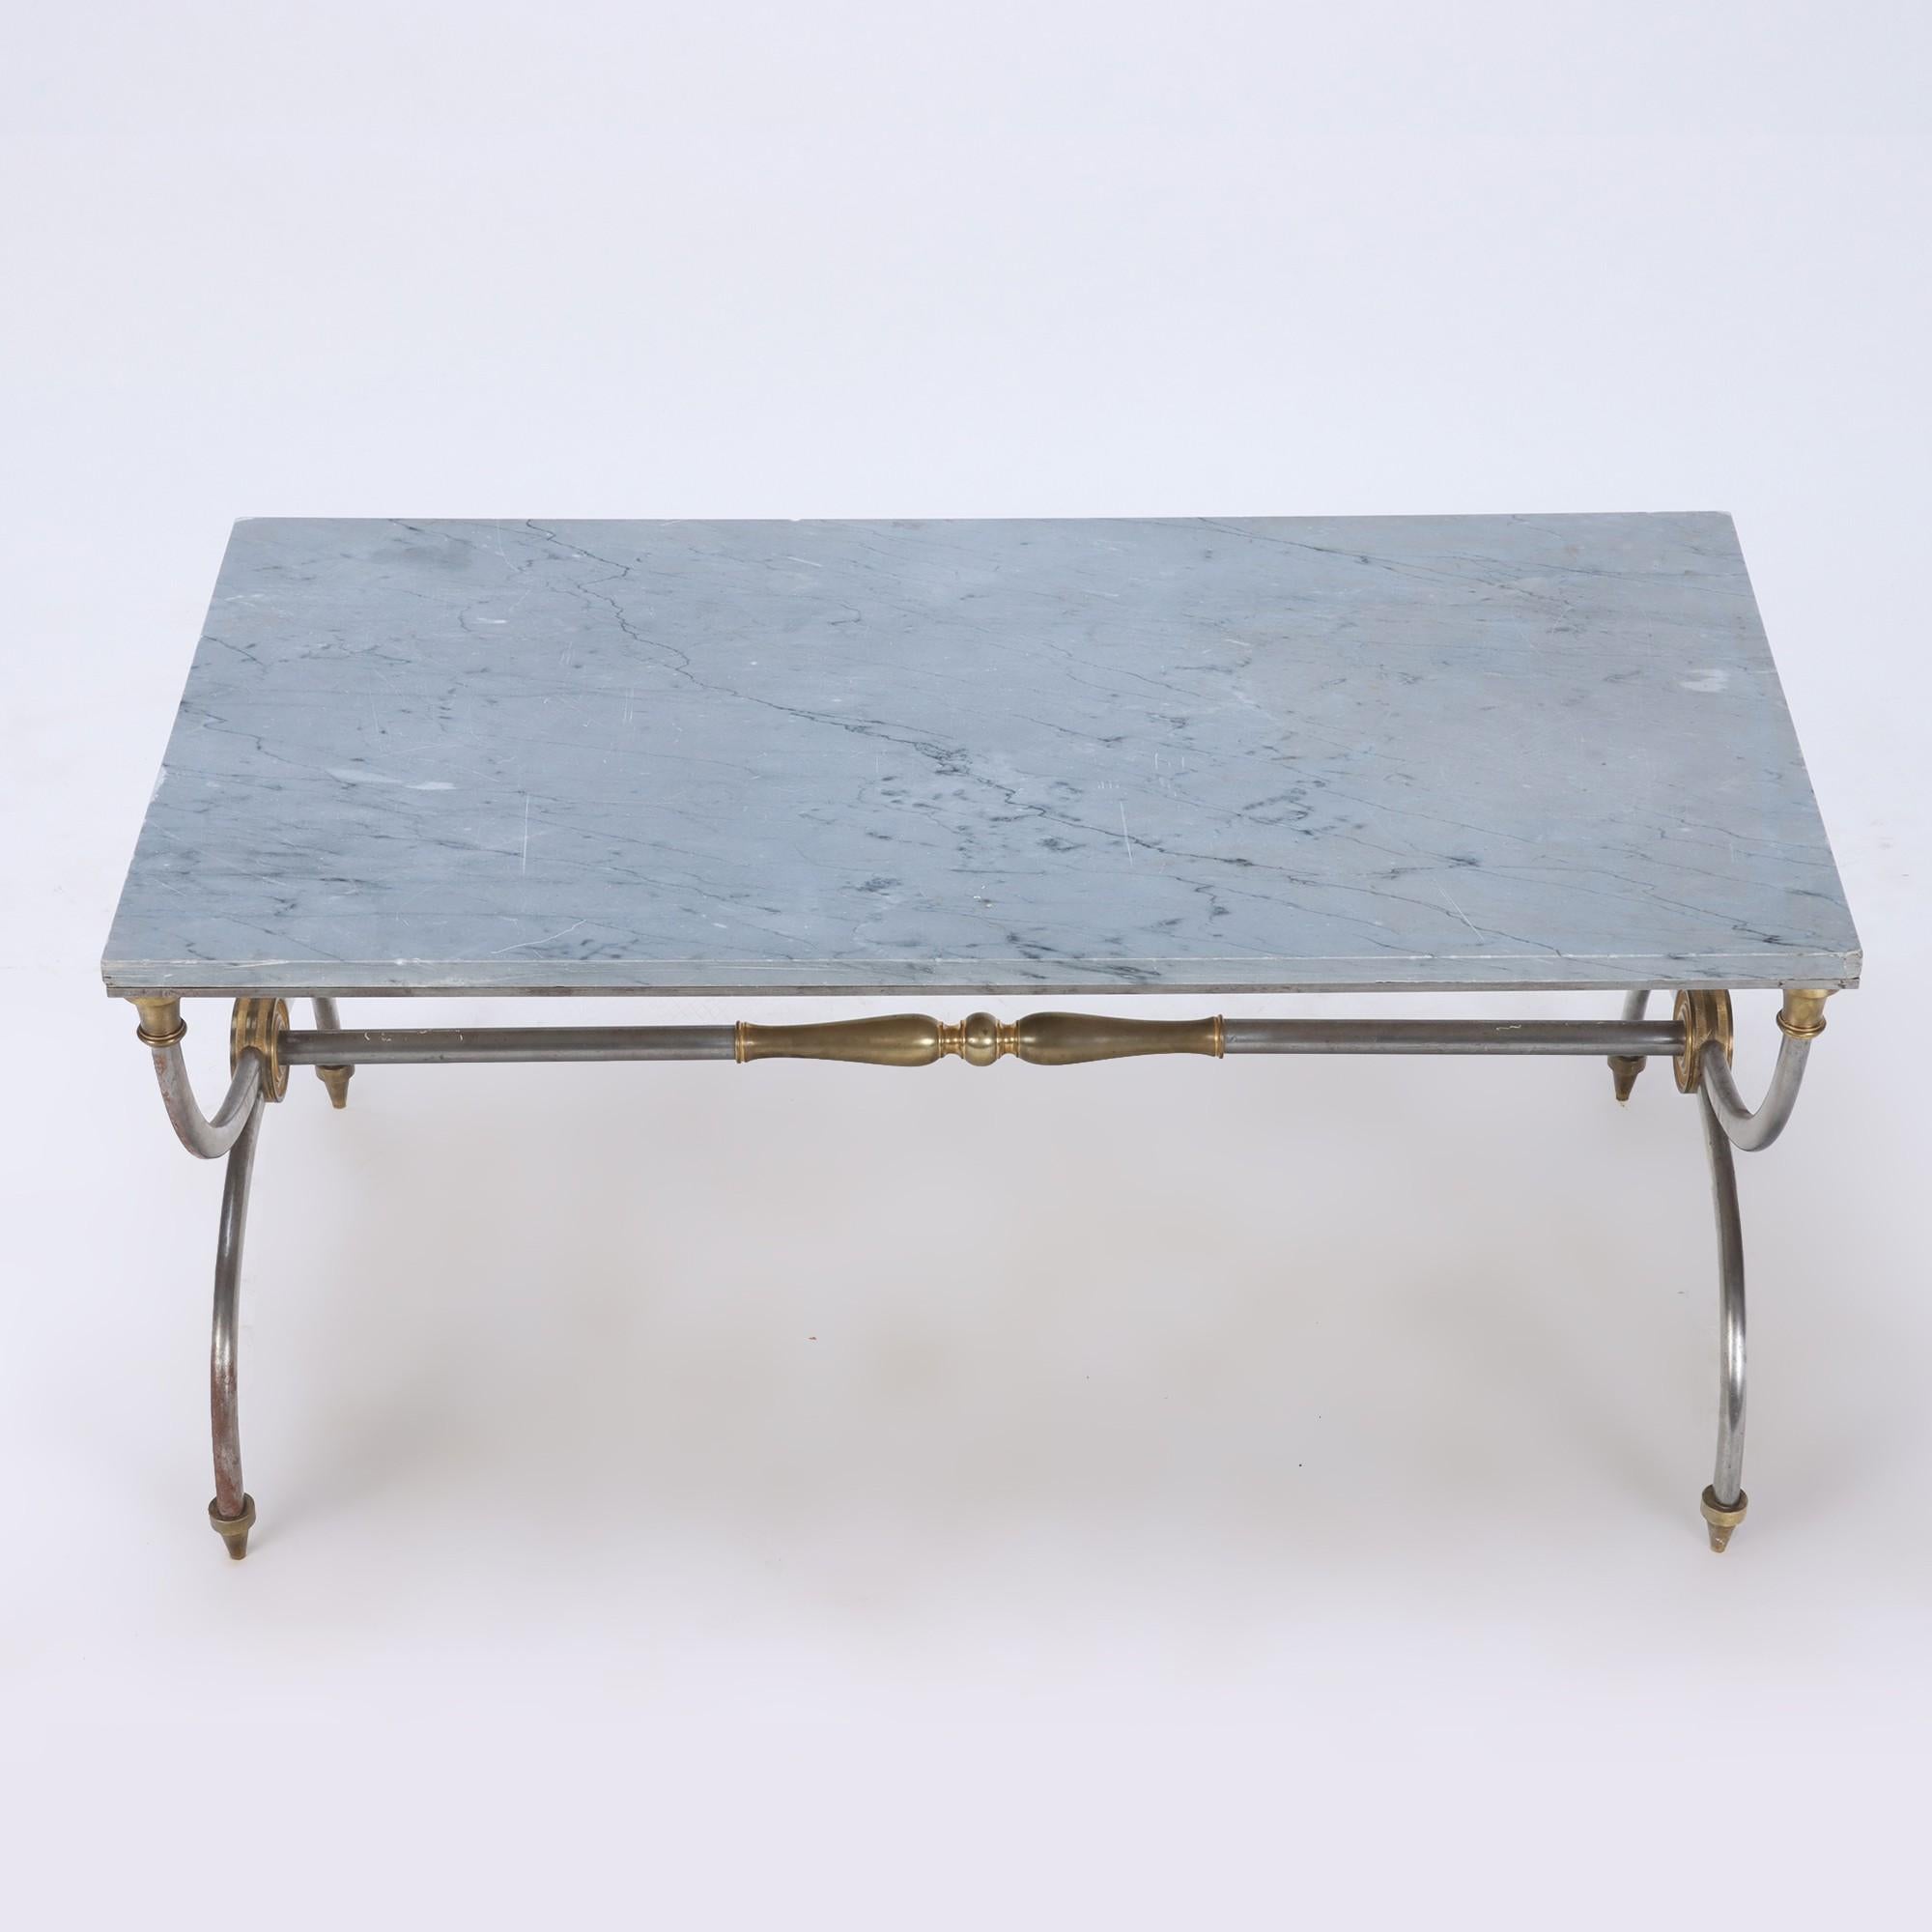 A two-tone bronze and steel coffee table in the French Empire style, Jansen, having a marble top with blue grey tint. Circa 1950.